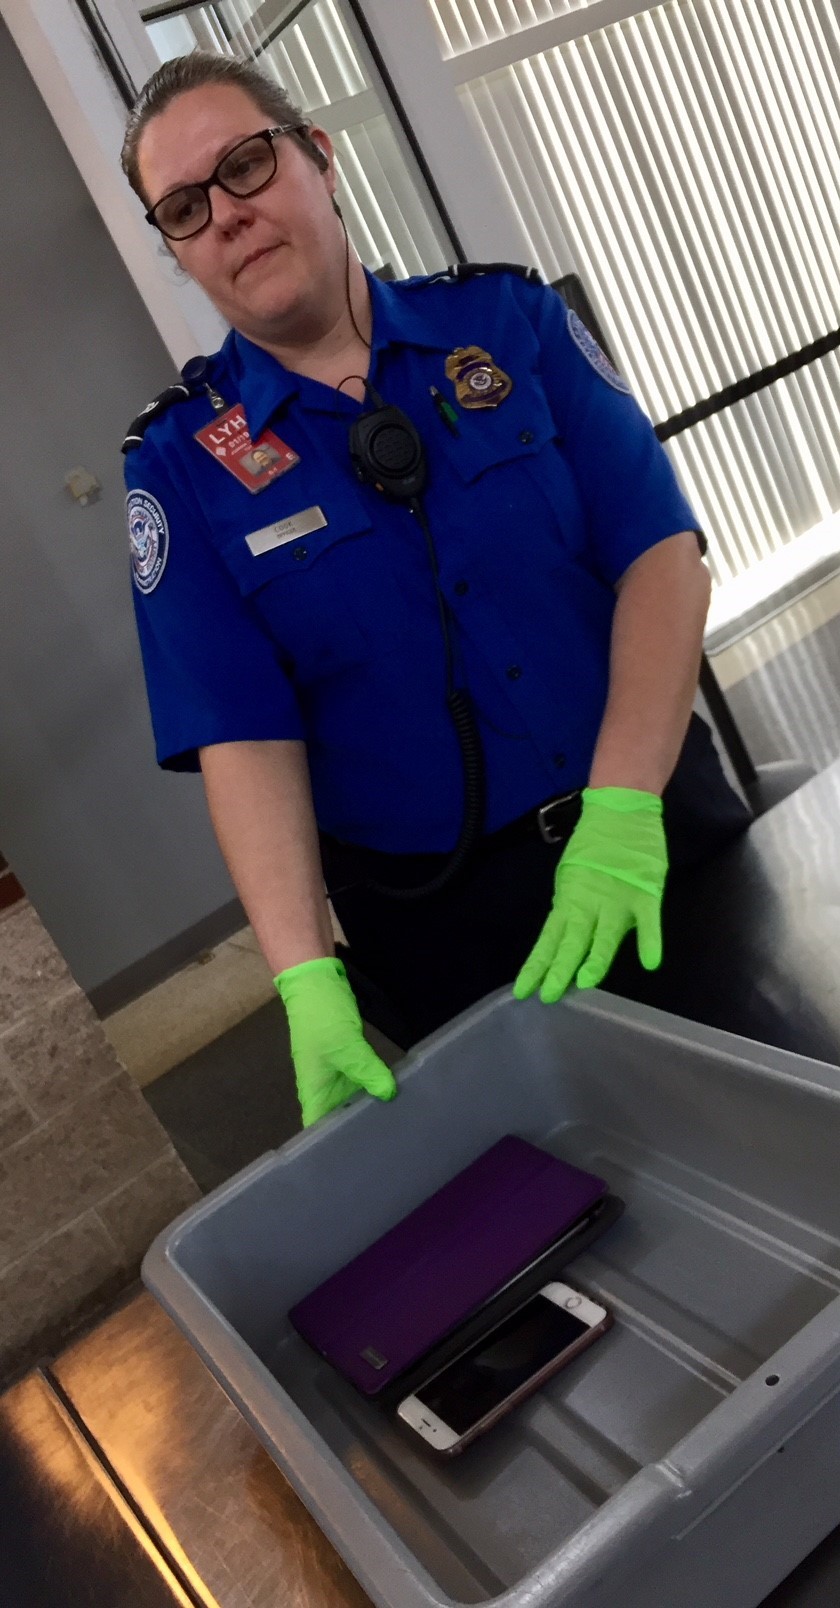 Travelers need to remove electronic items larger than a cell phone from their carry-on bags to place them in a bin at the checkpoint. Cell phones also need to be removed from pockets to be placed either inside a carry-on bag or in a bin. (TSA photo)